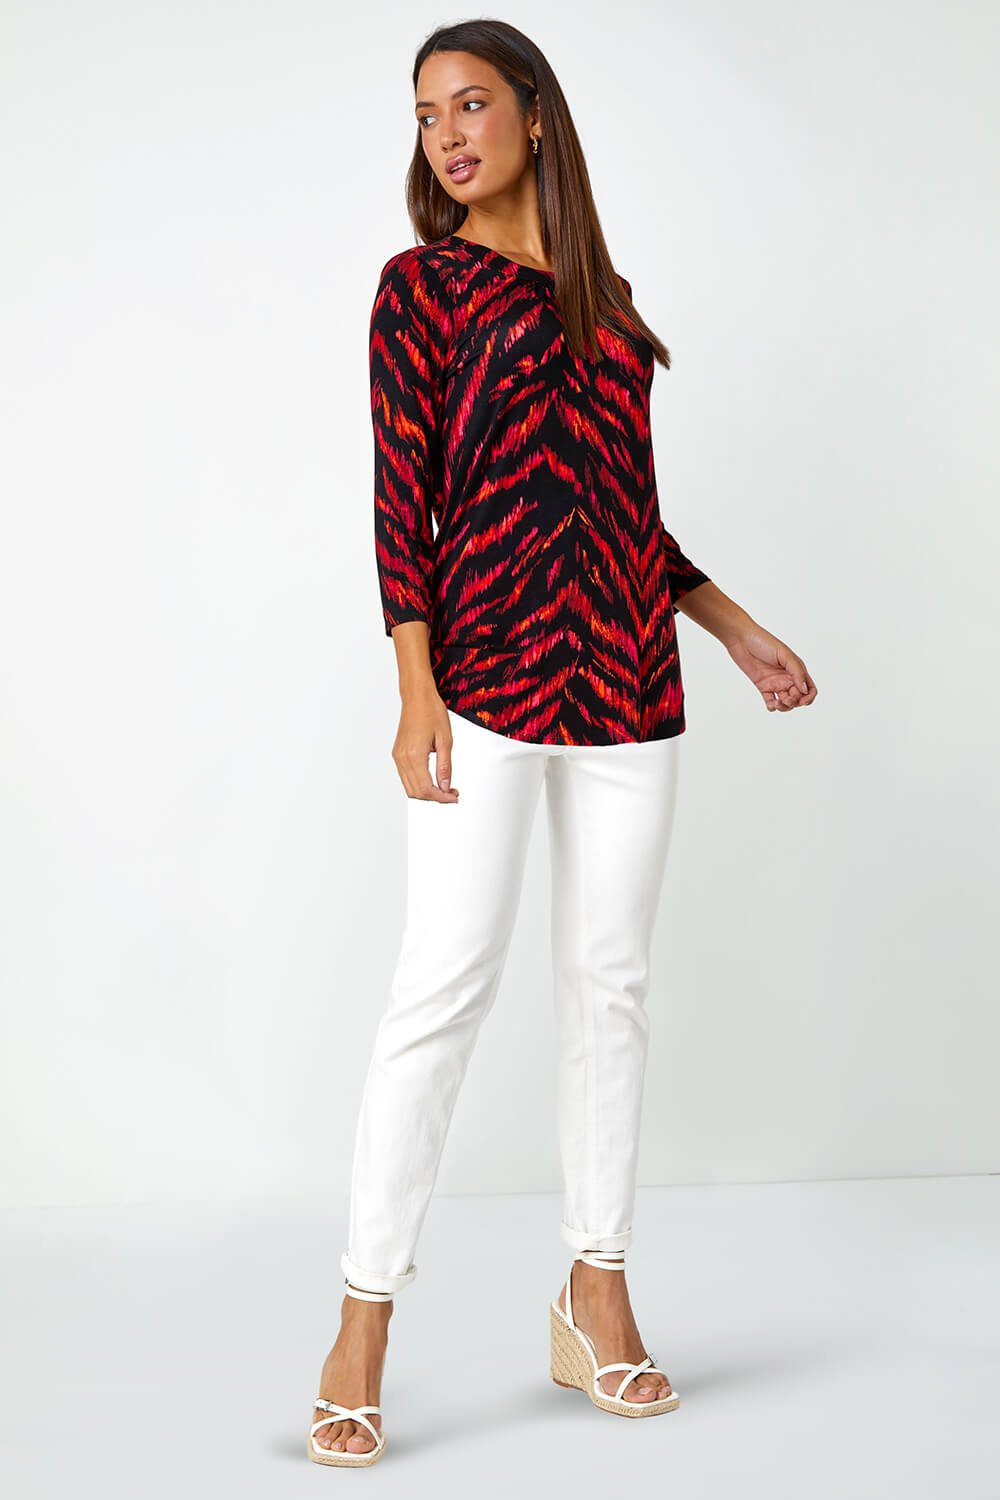 Red Animal Print Tunic Stretch Top, Image 2 of 5